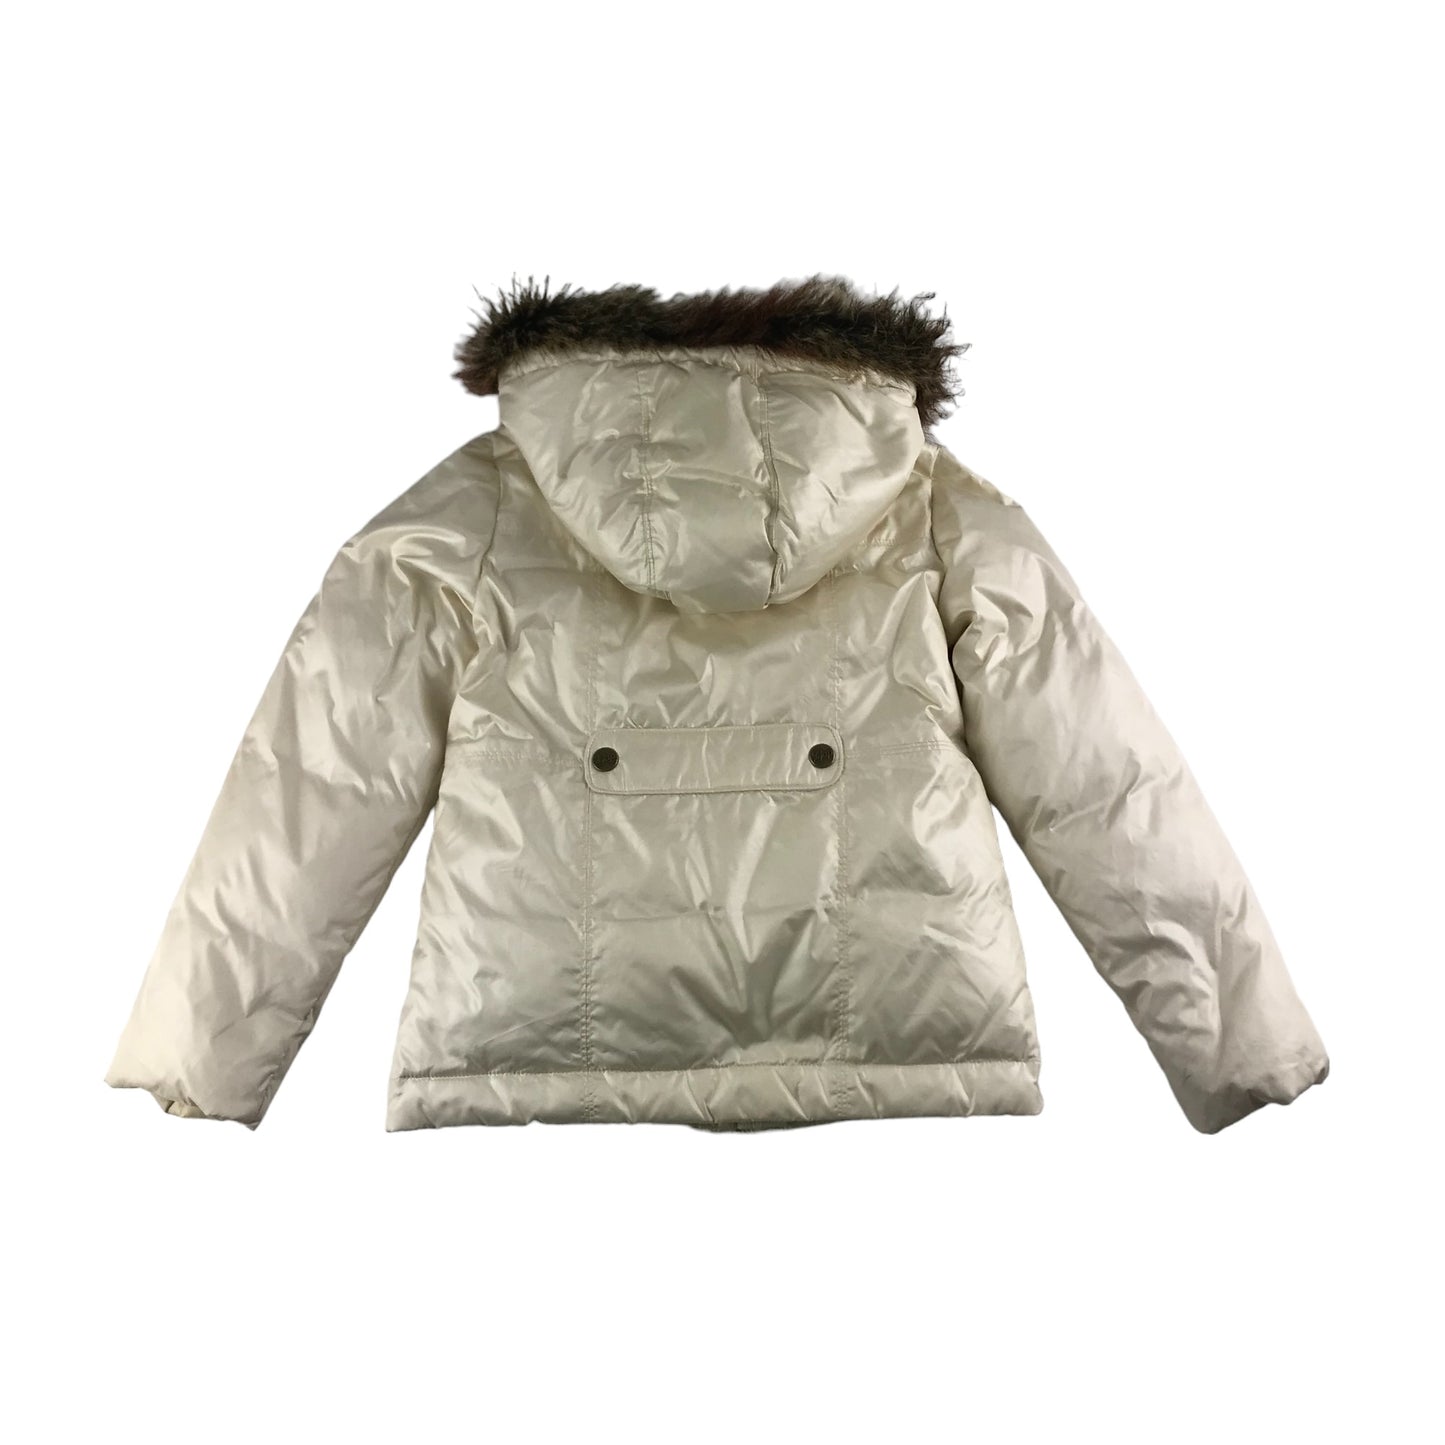 GAP Jacket Age 12 Pearl White Puffer with Faux Fur Hood Trim